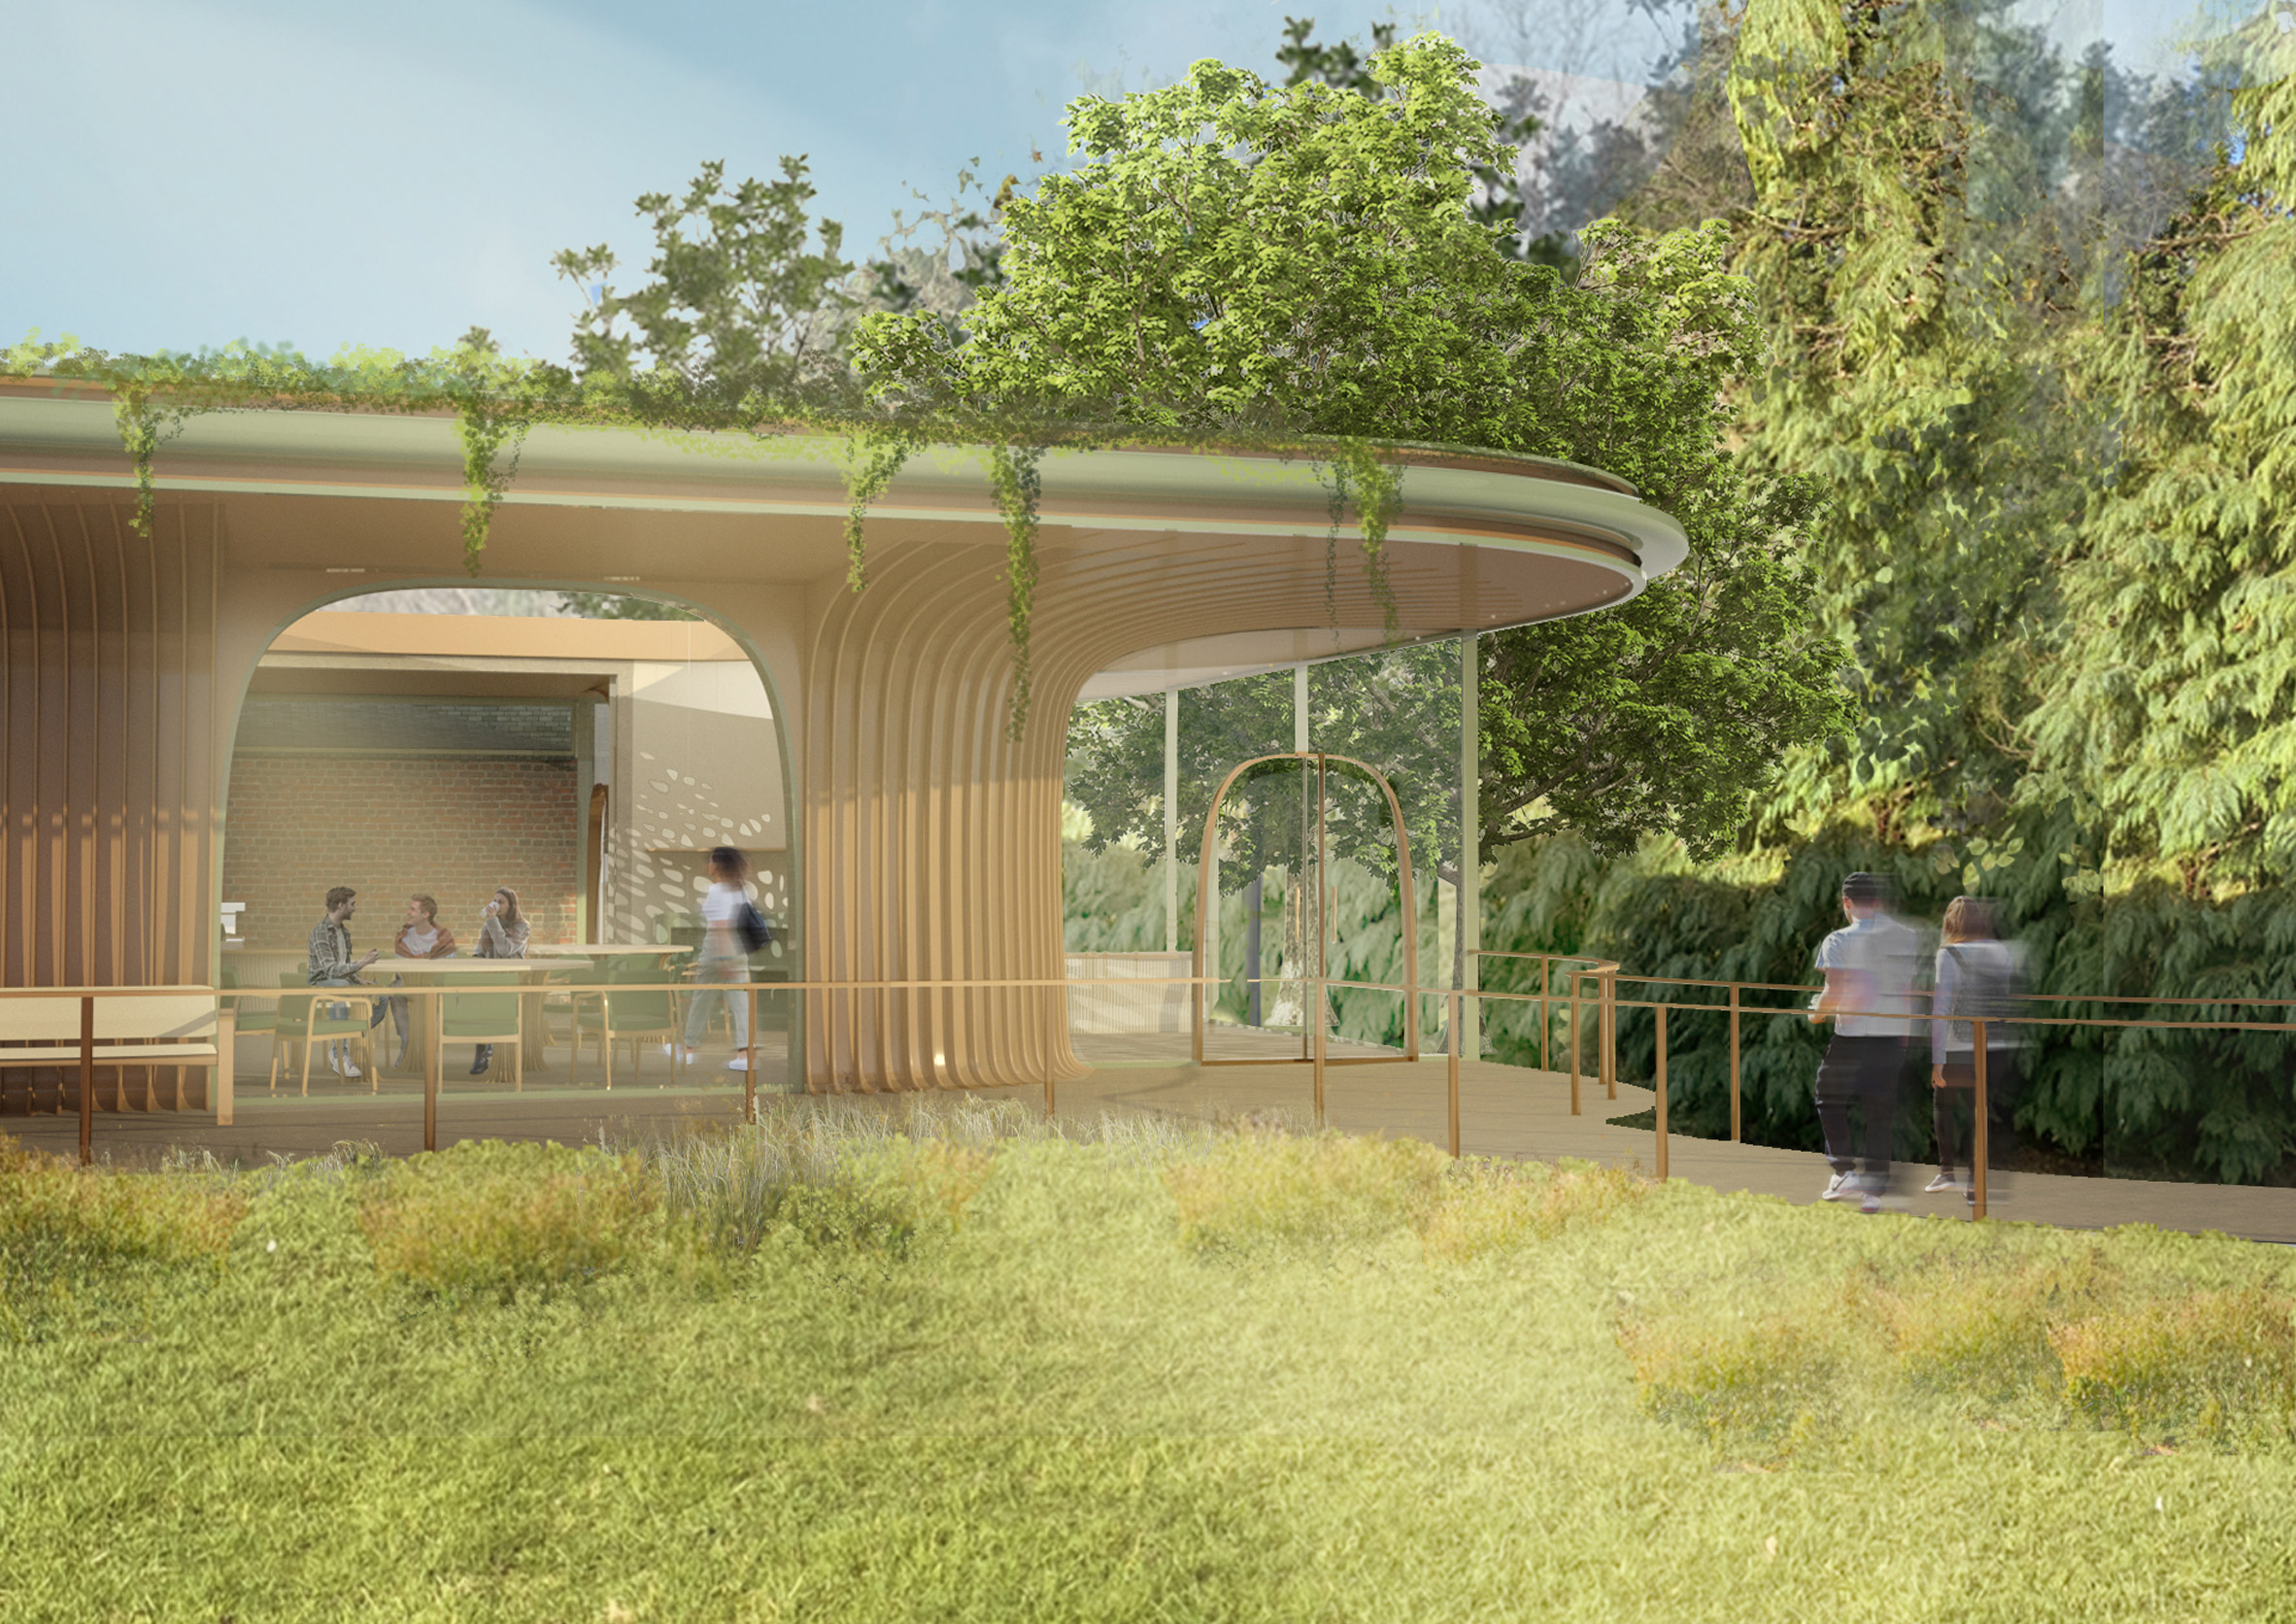 Render of a curved timber building in a meadow by a student at the University of the Arts London